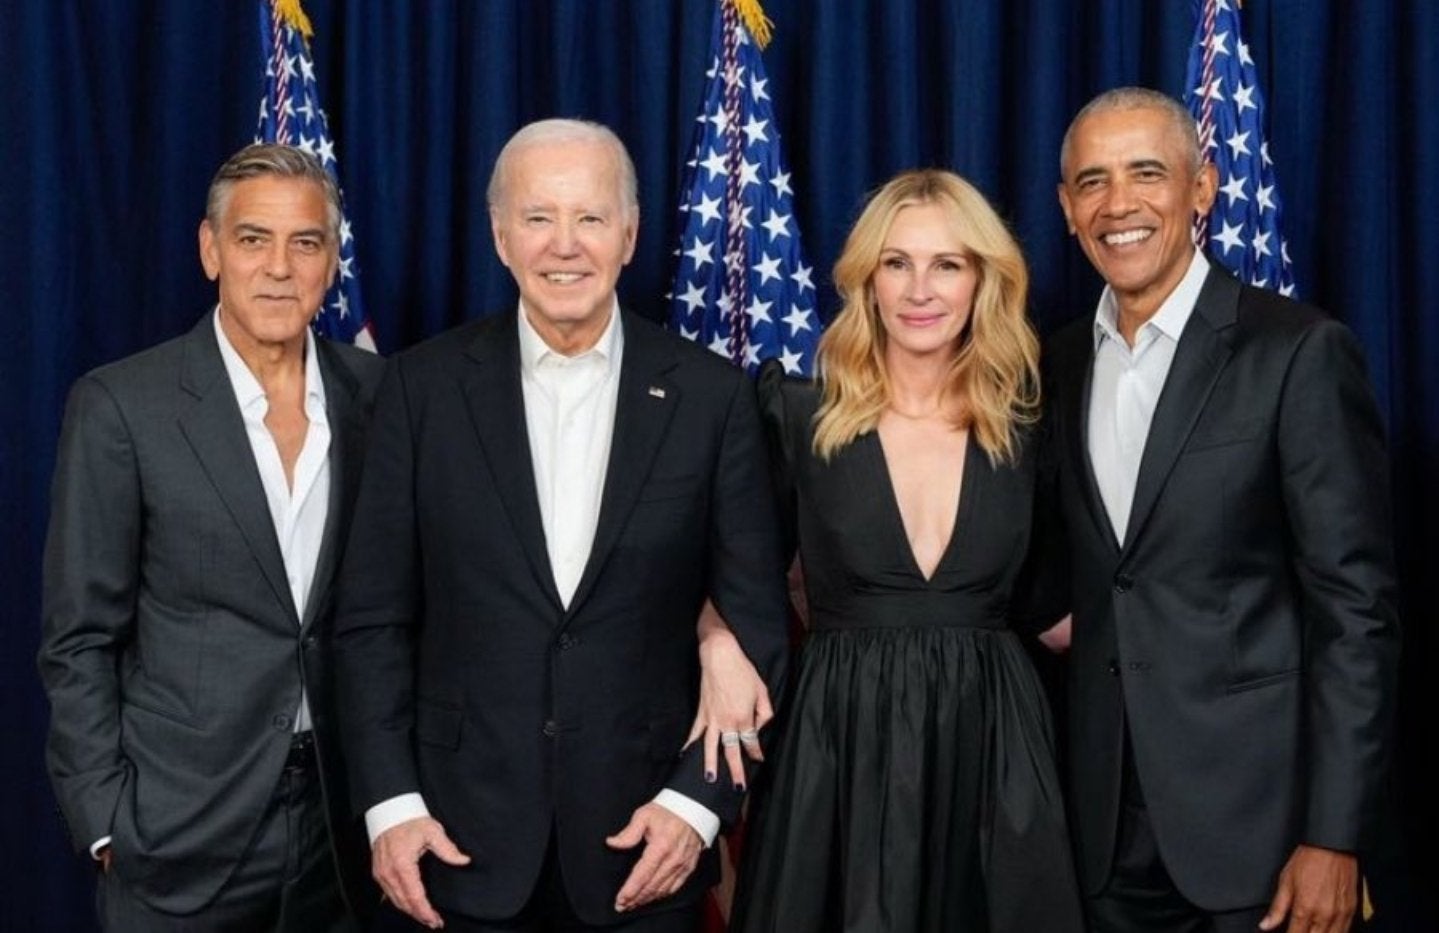 Two weeks before his disastrous debate performance, Biden attended a star-studded fundraiser in Los Angeles – some 2,000 miles away